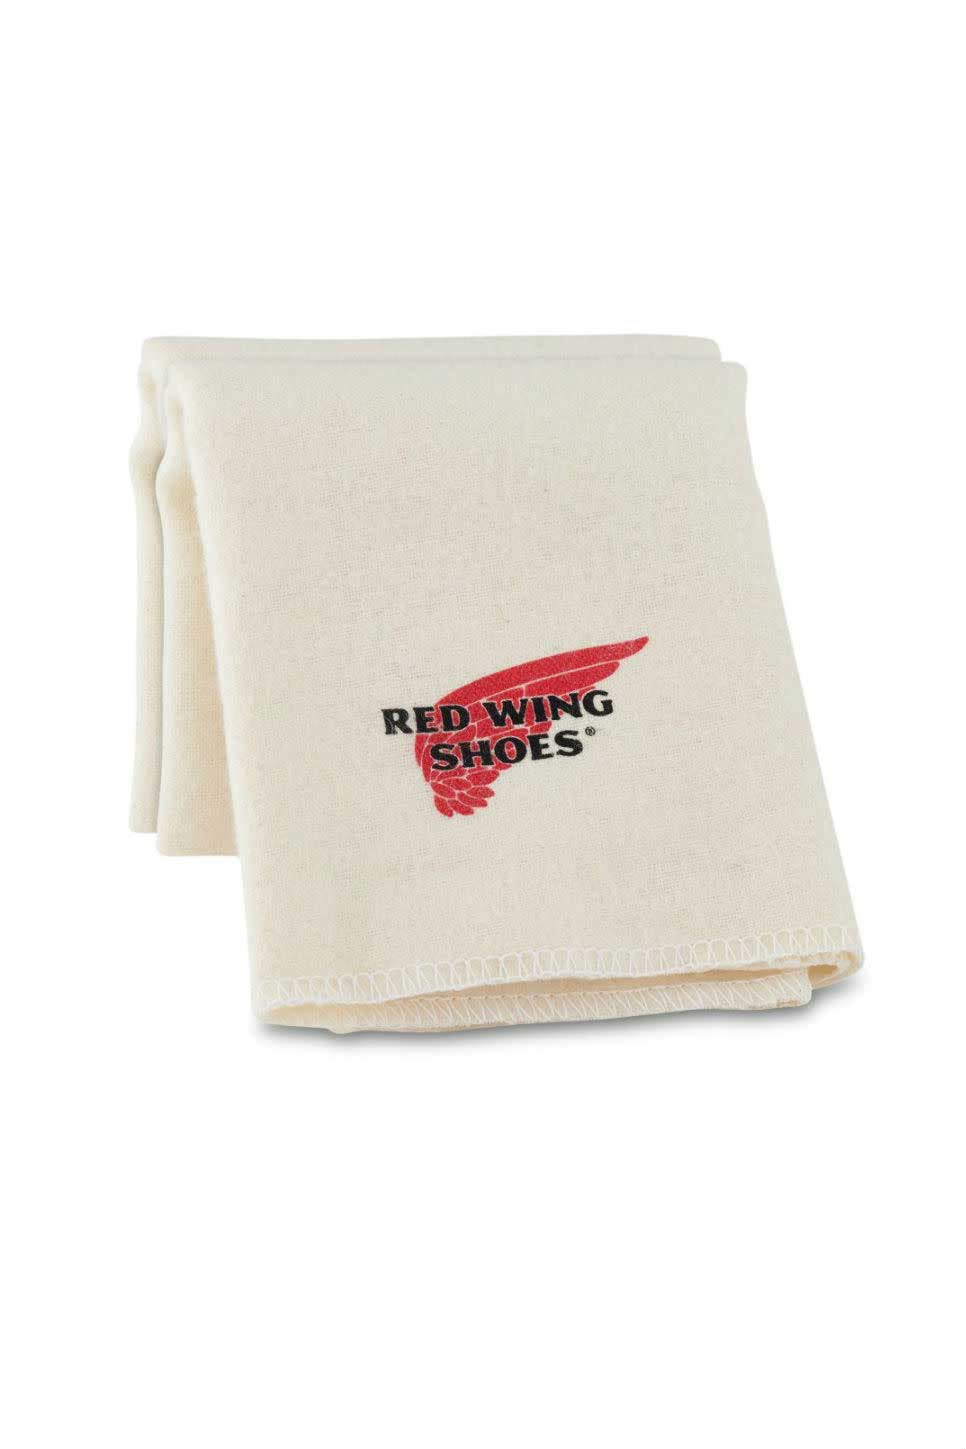 Red Wing - Boot Care Cloths